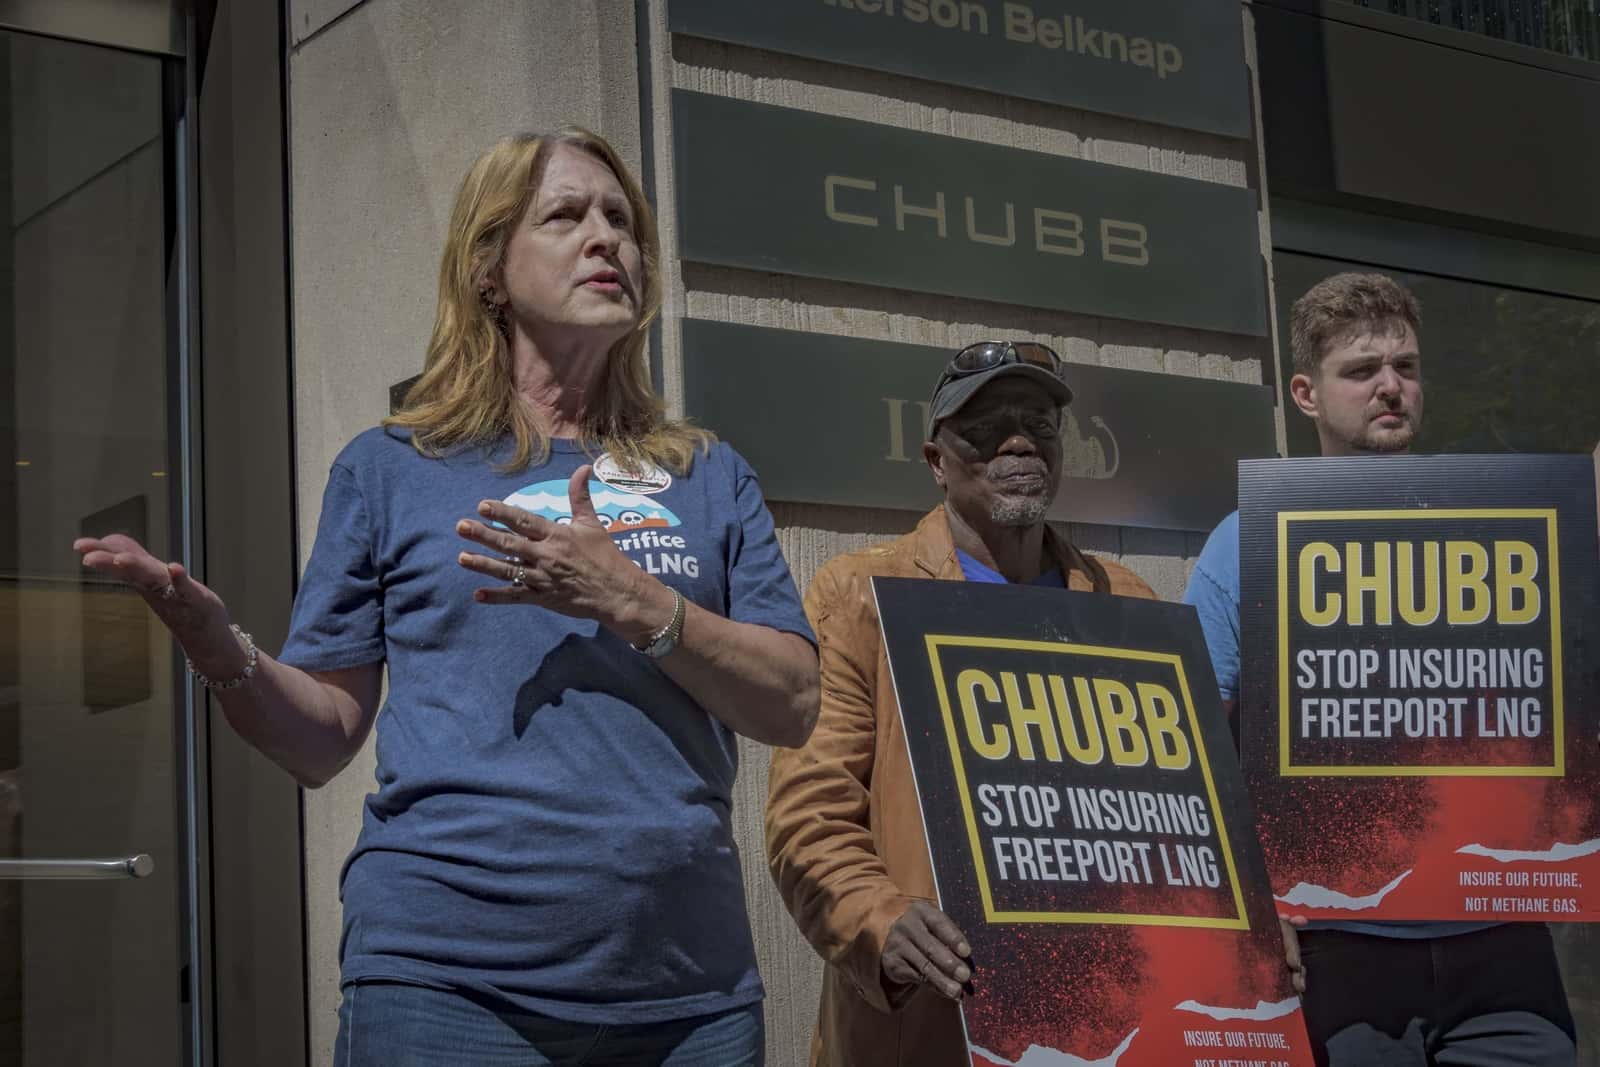 A woman is gesturing with her hands while speaking. Two men standing to her right hold signs that read "CHUBB stop insuring Freeport LNG."